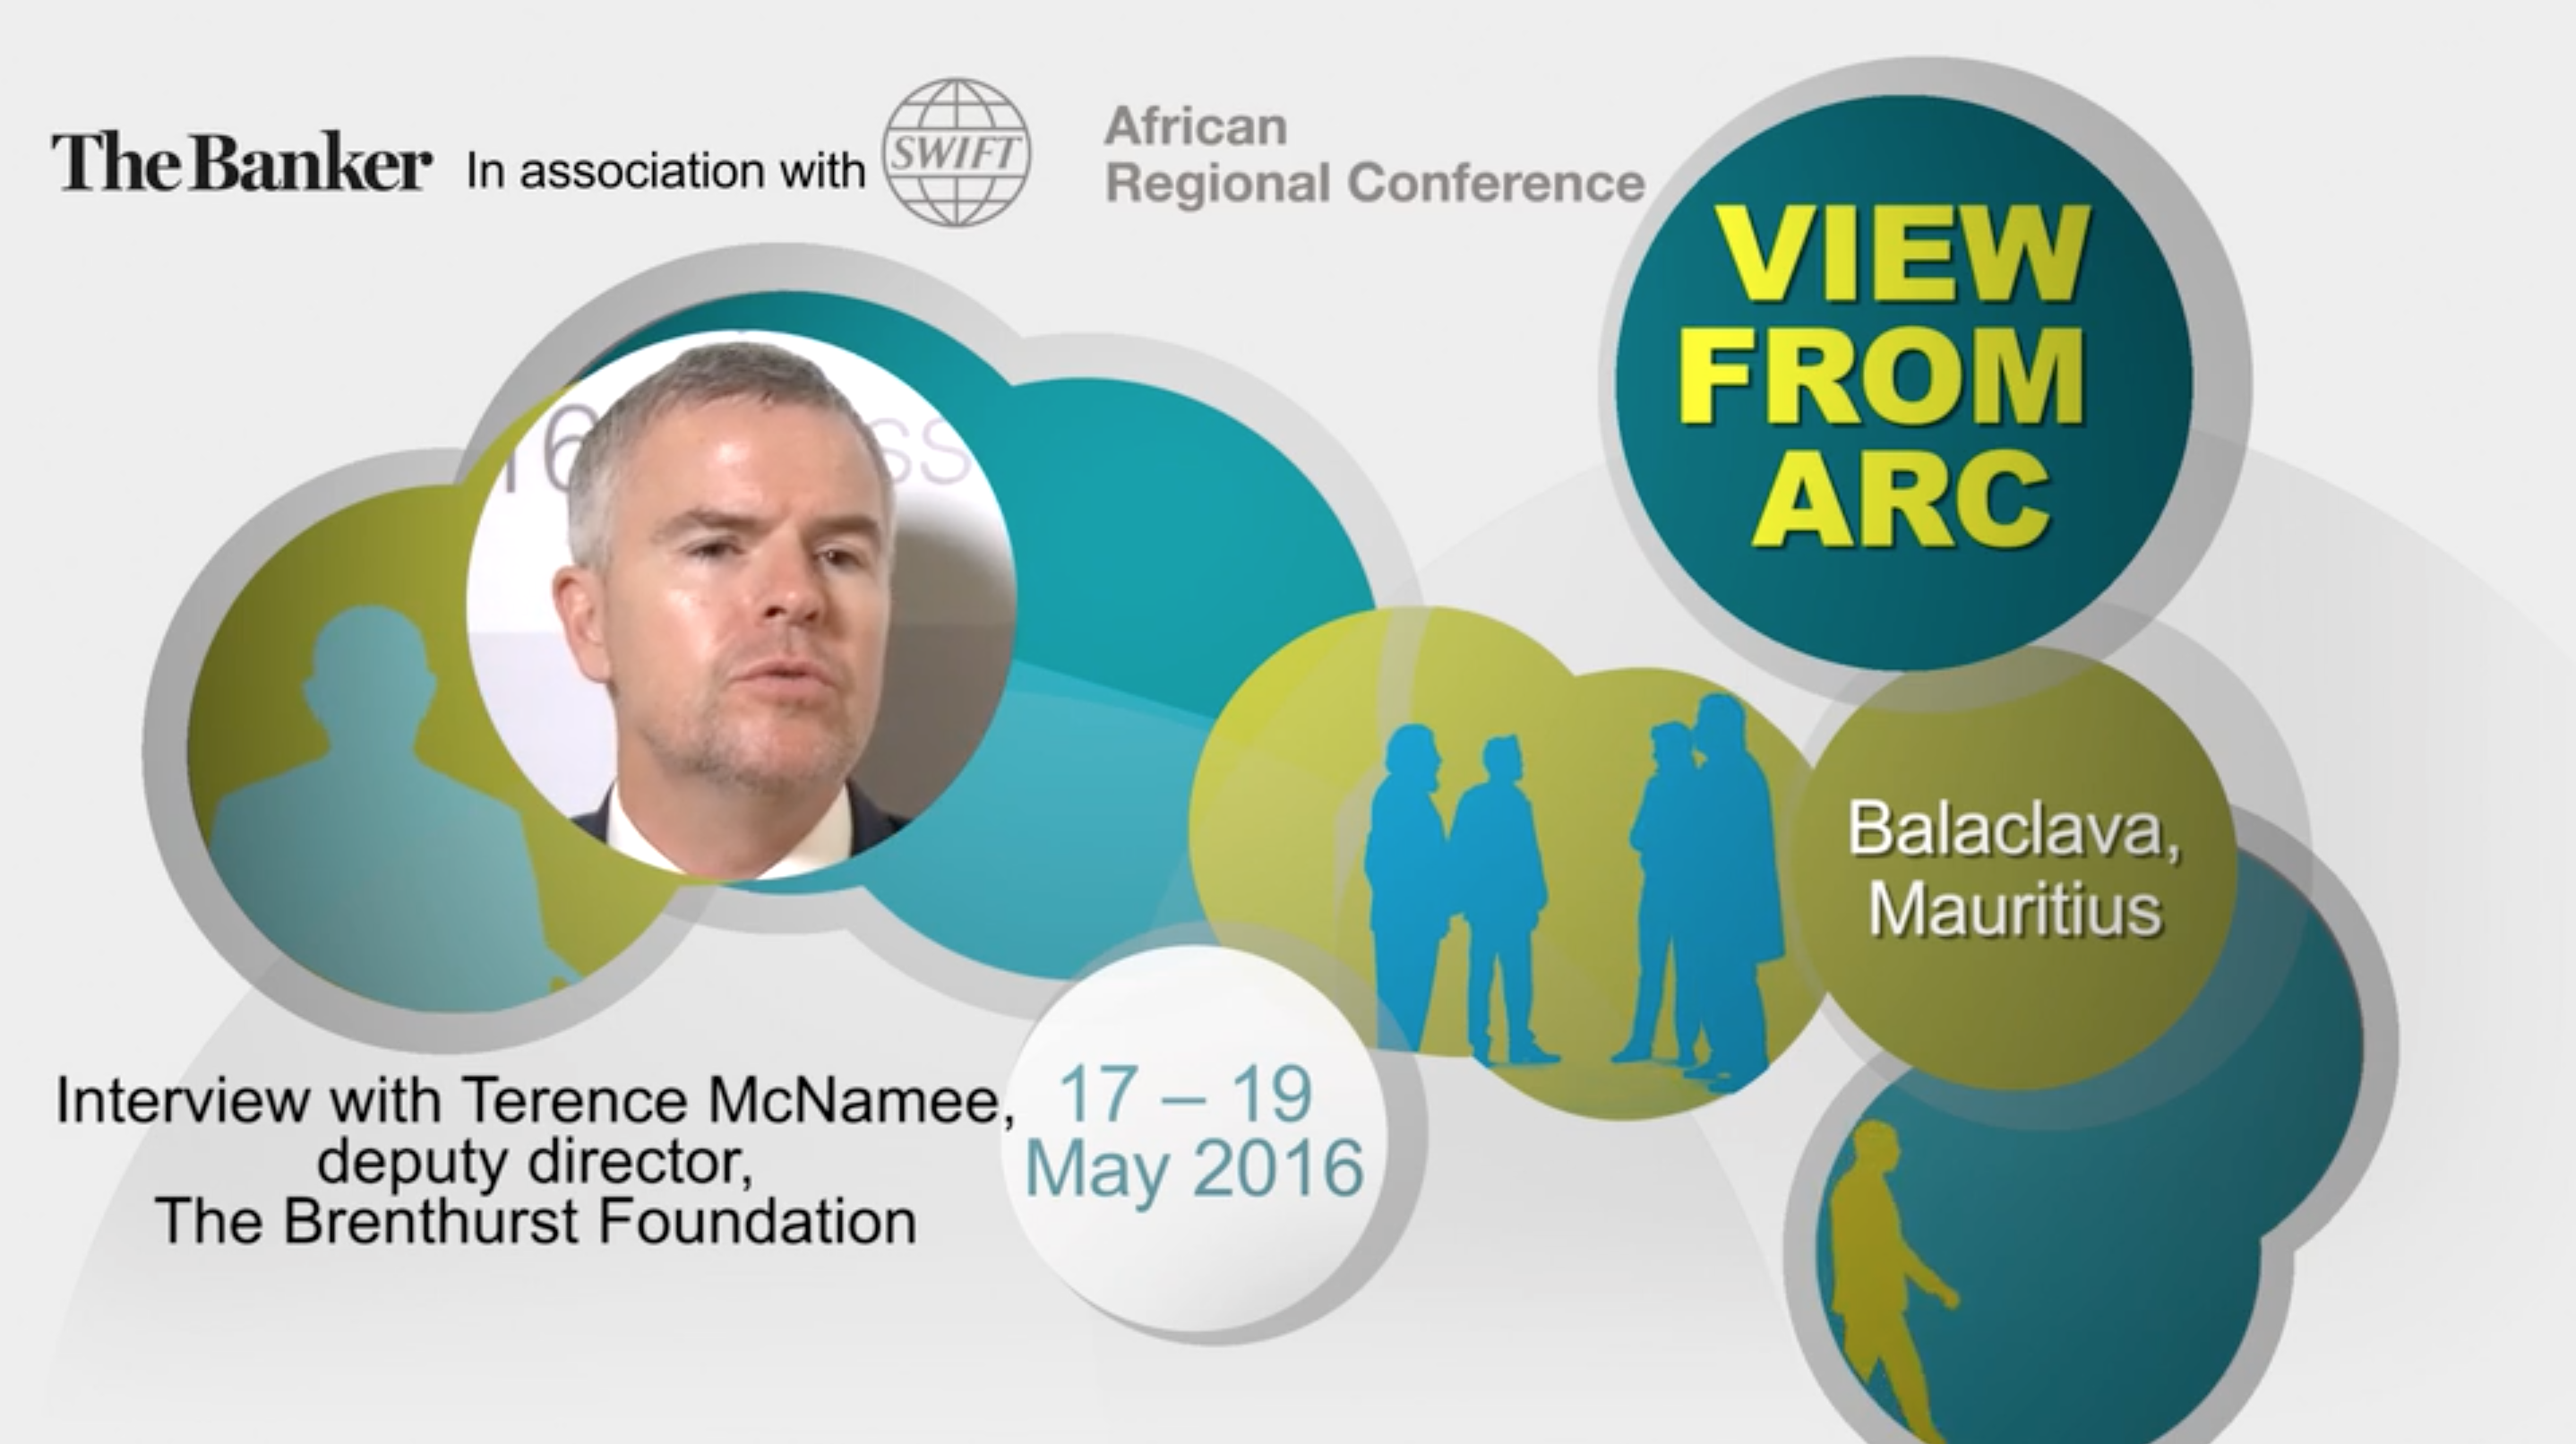 View from ARC 2016 - Terence McNamee in Balaclava, Mauritius